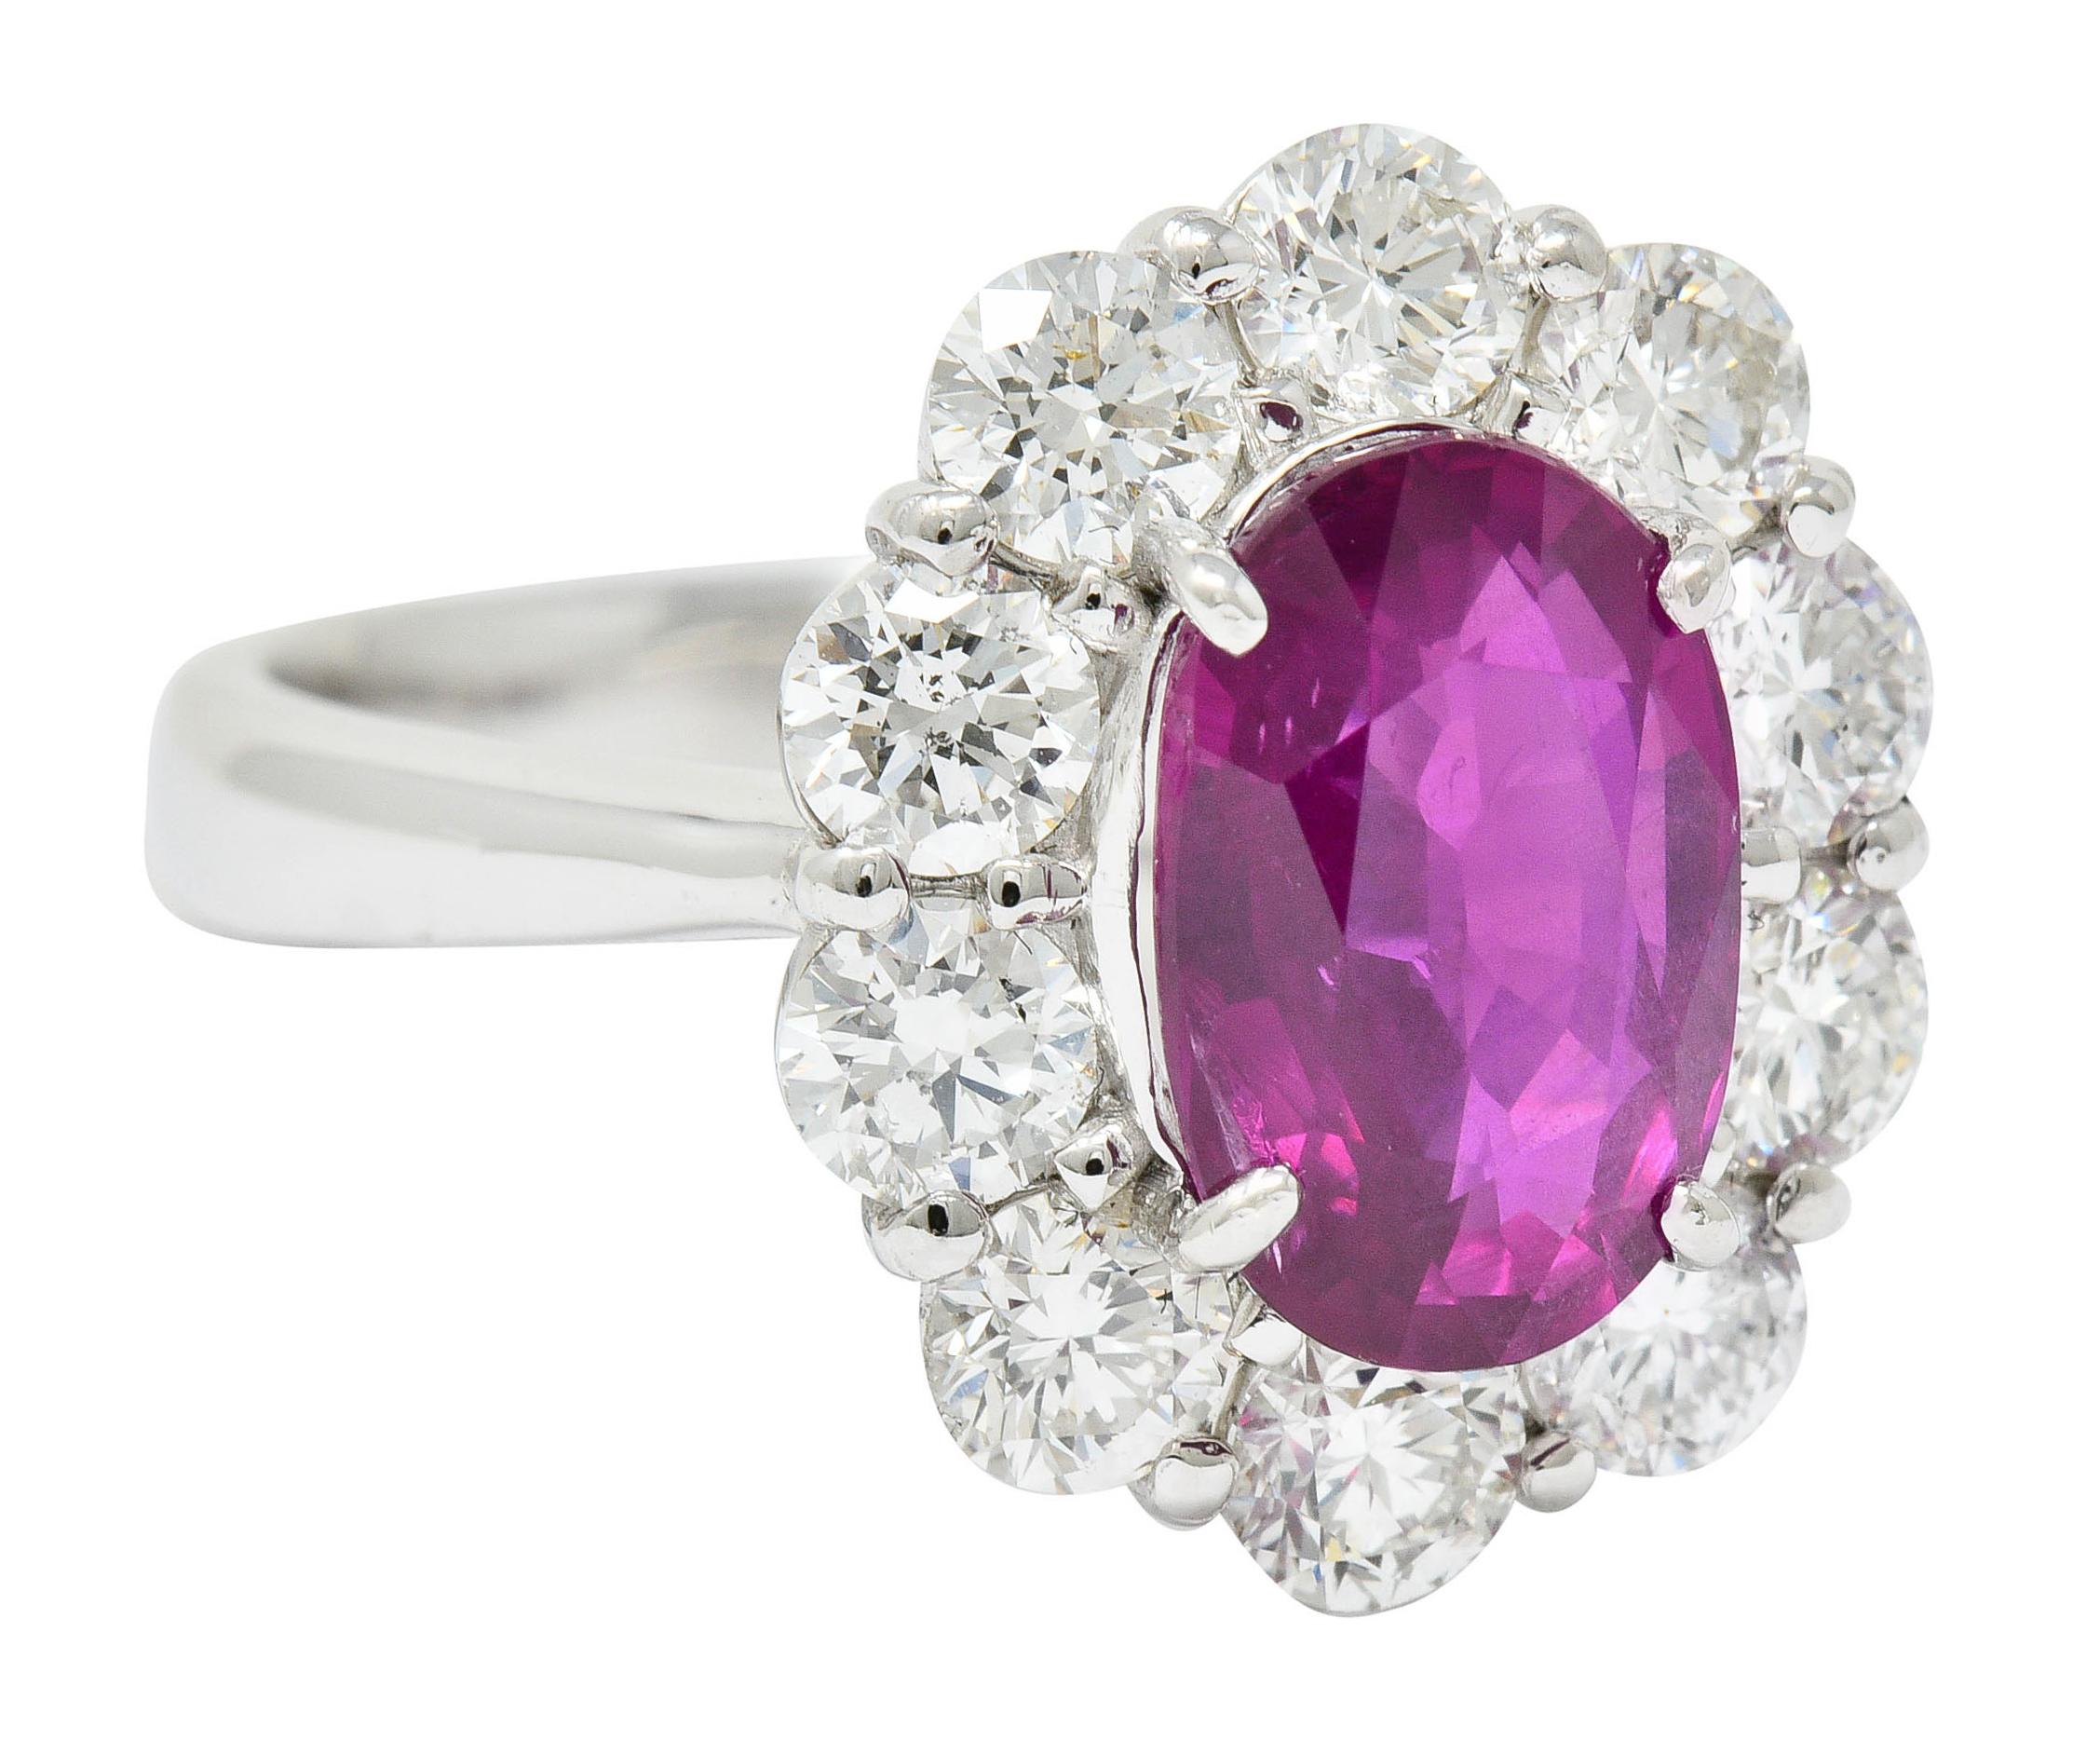 Cluster style ring centering an oval cut ruby weighing 3.03 carats; translucent purplish-red color

No indications of heat with slight and romantic chatoyancy; Mozambique origin

Surrounded by round brilliant cut diamonds weighing 1.63 carats; G/H